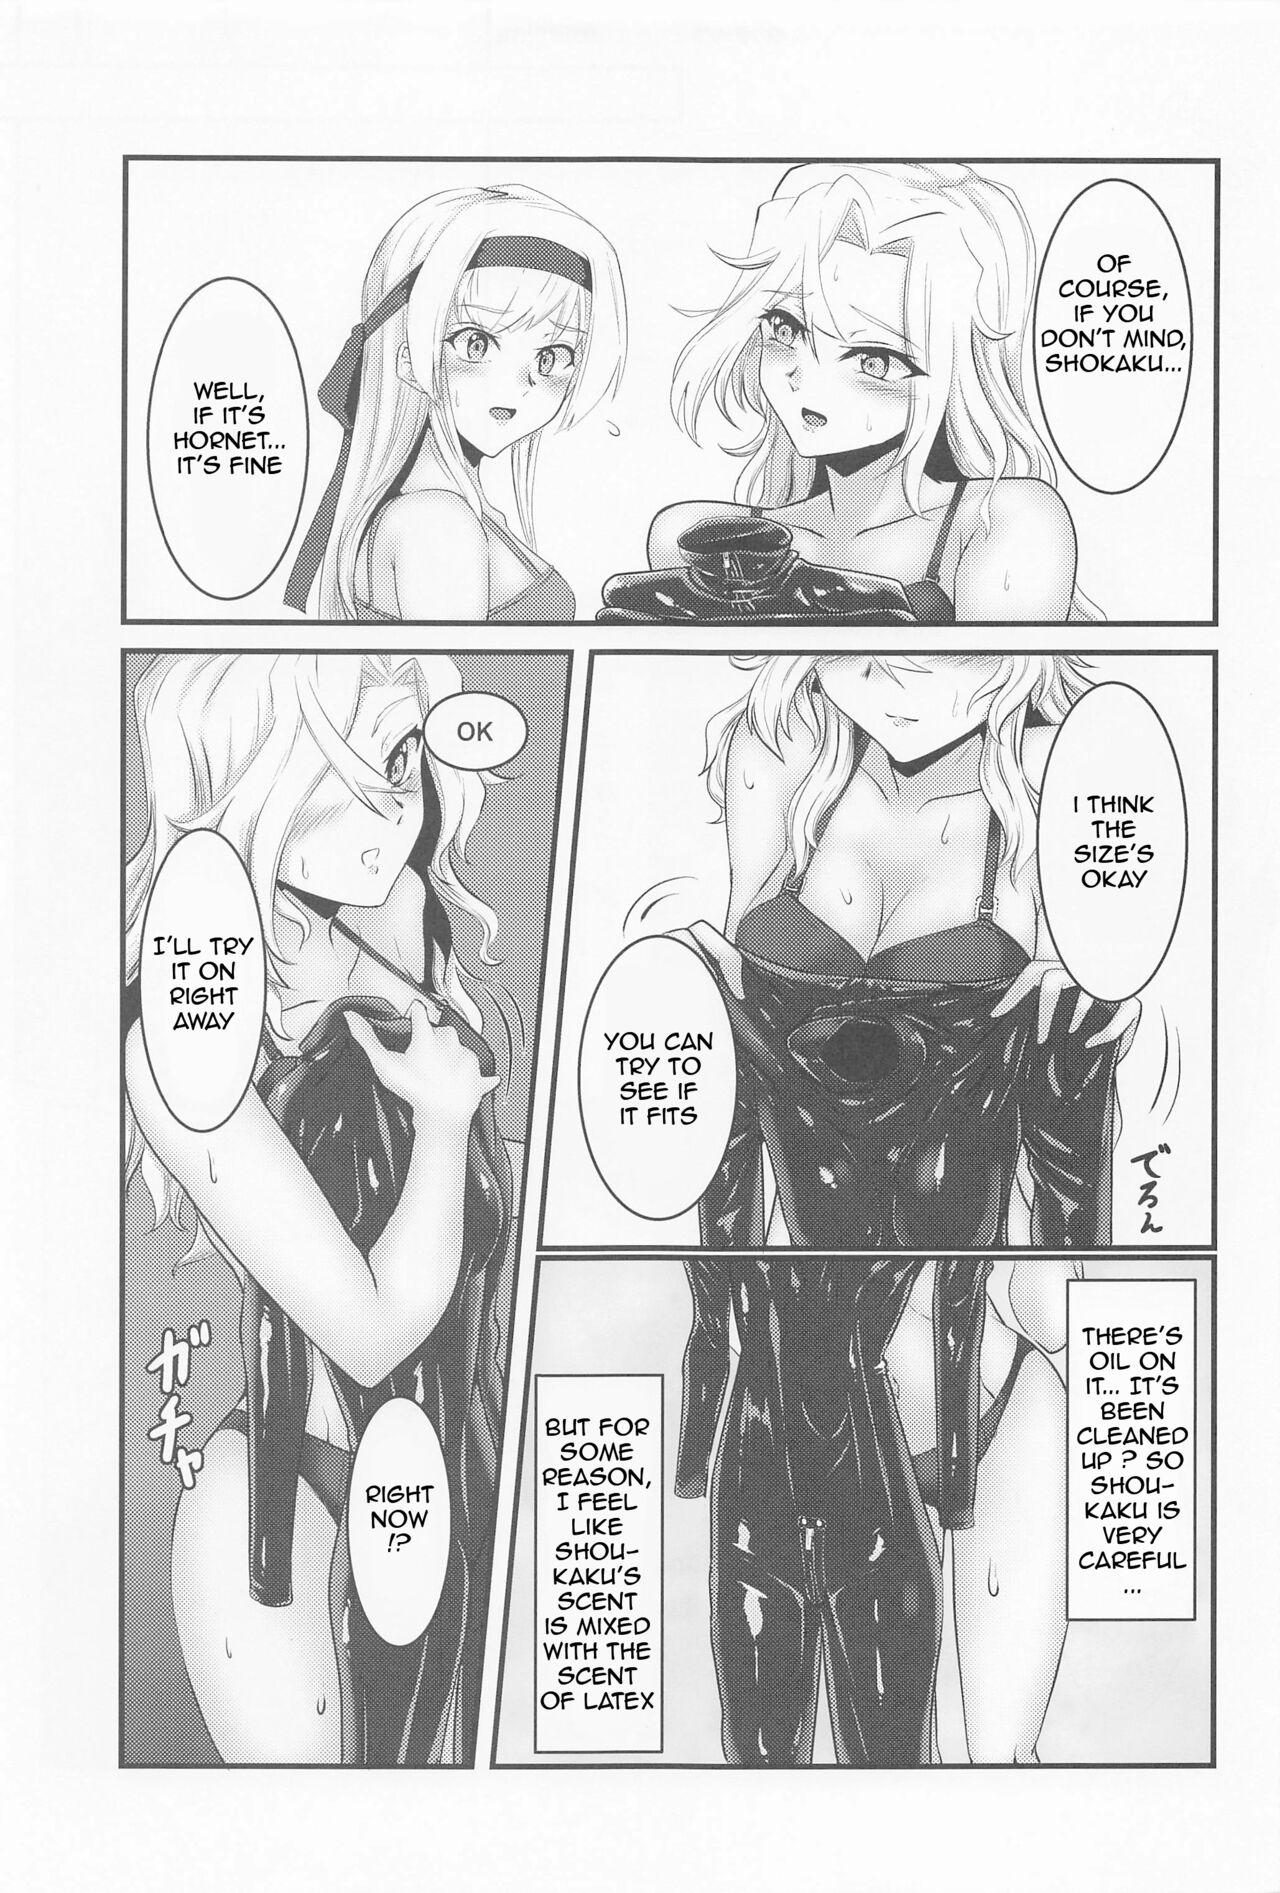 European Porn Covered by Honey... - Kantai collection Backshots - Page 6